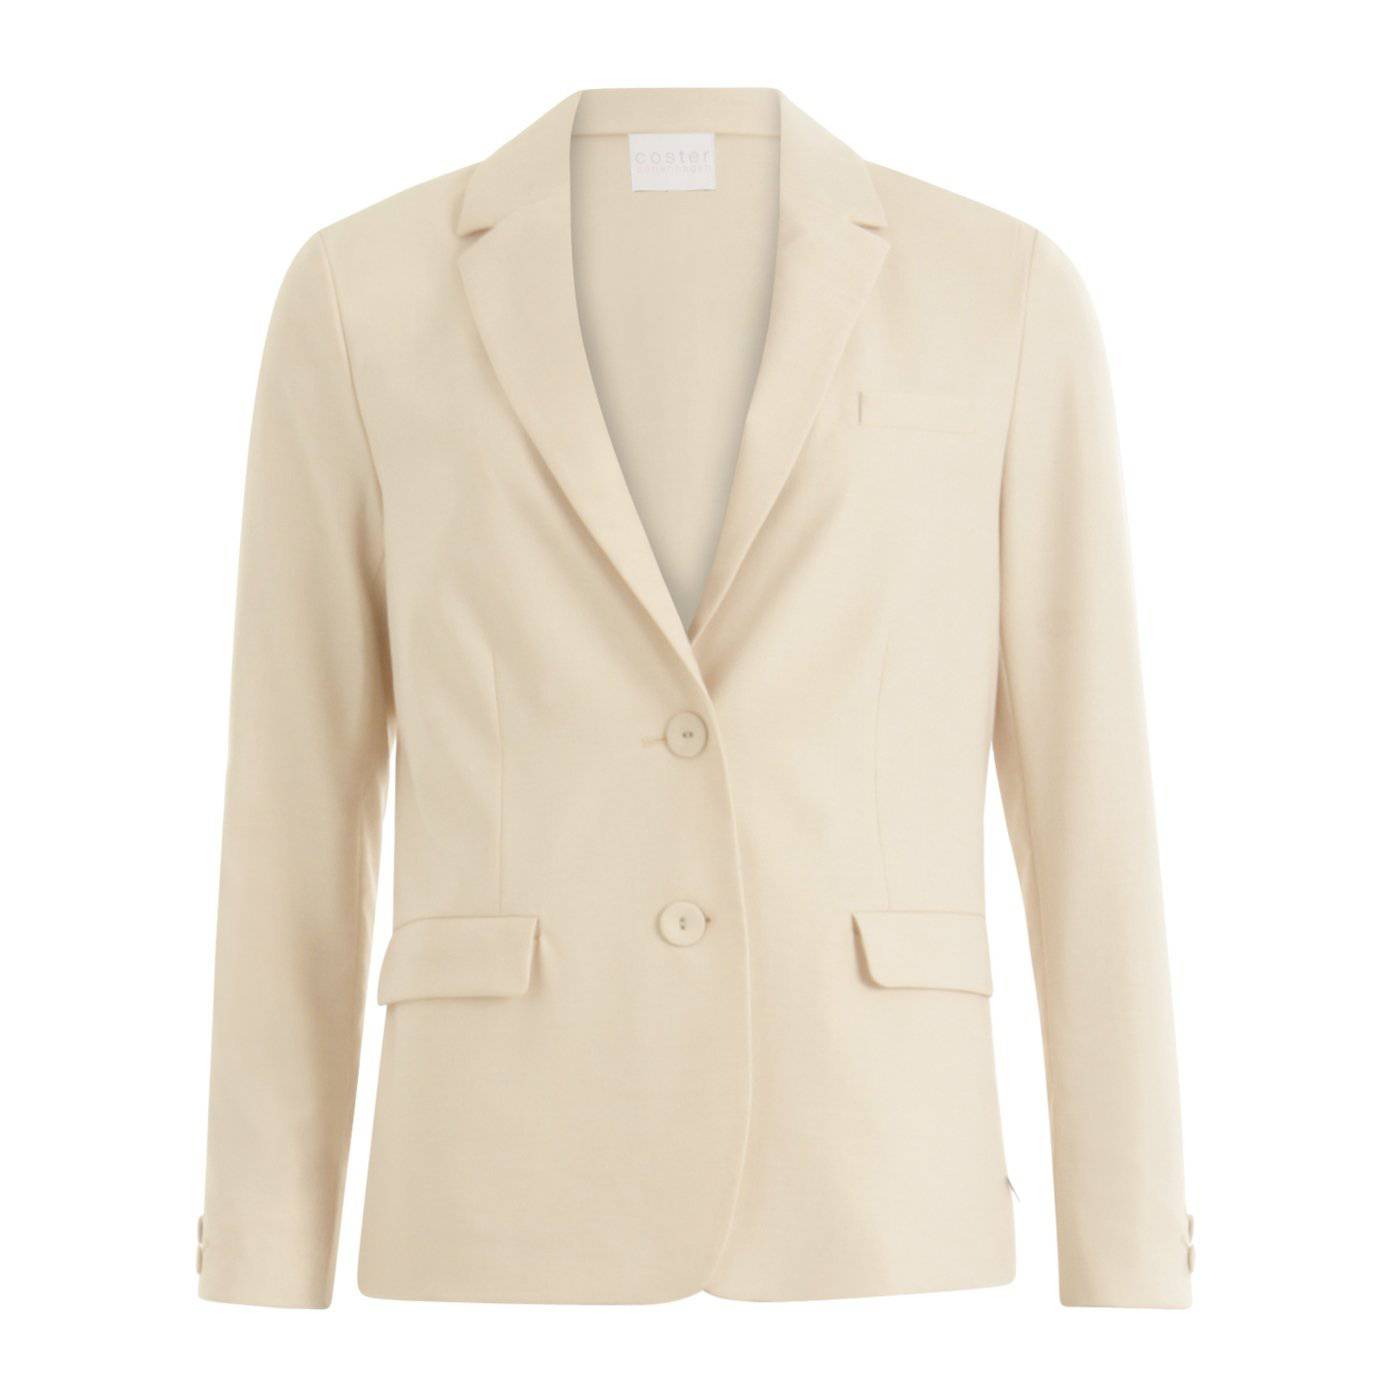 Coster Copenhagen creme suit jacket w. button details at cuffs - Your Style Your Story